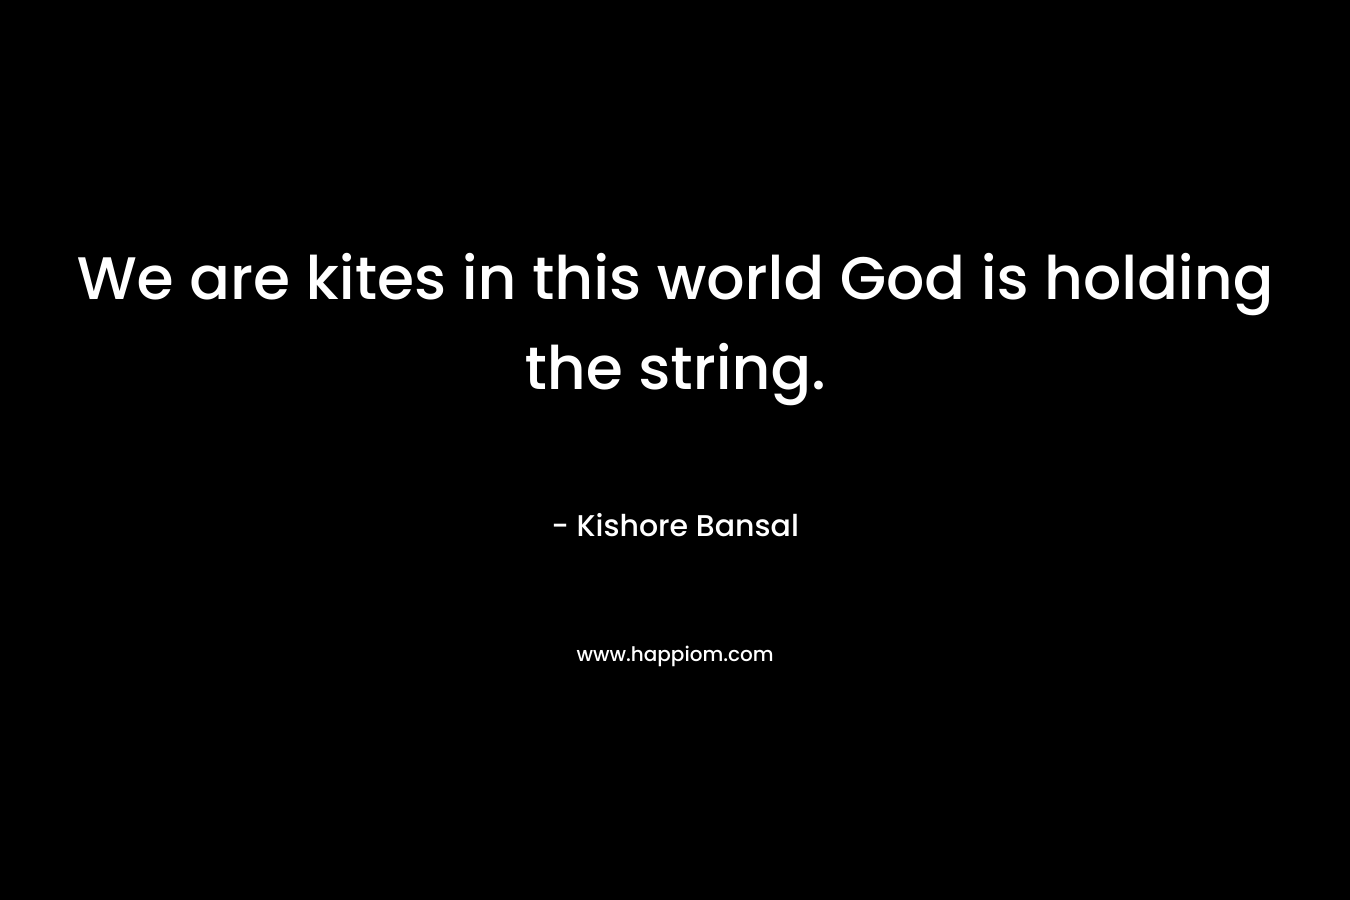 We are kites in this world God is holding the string.